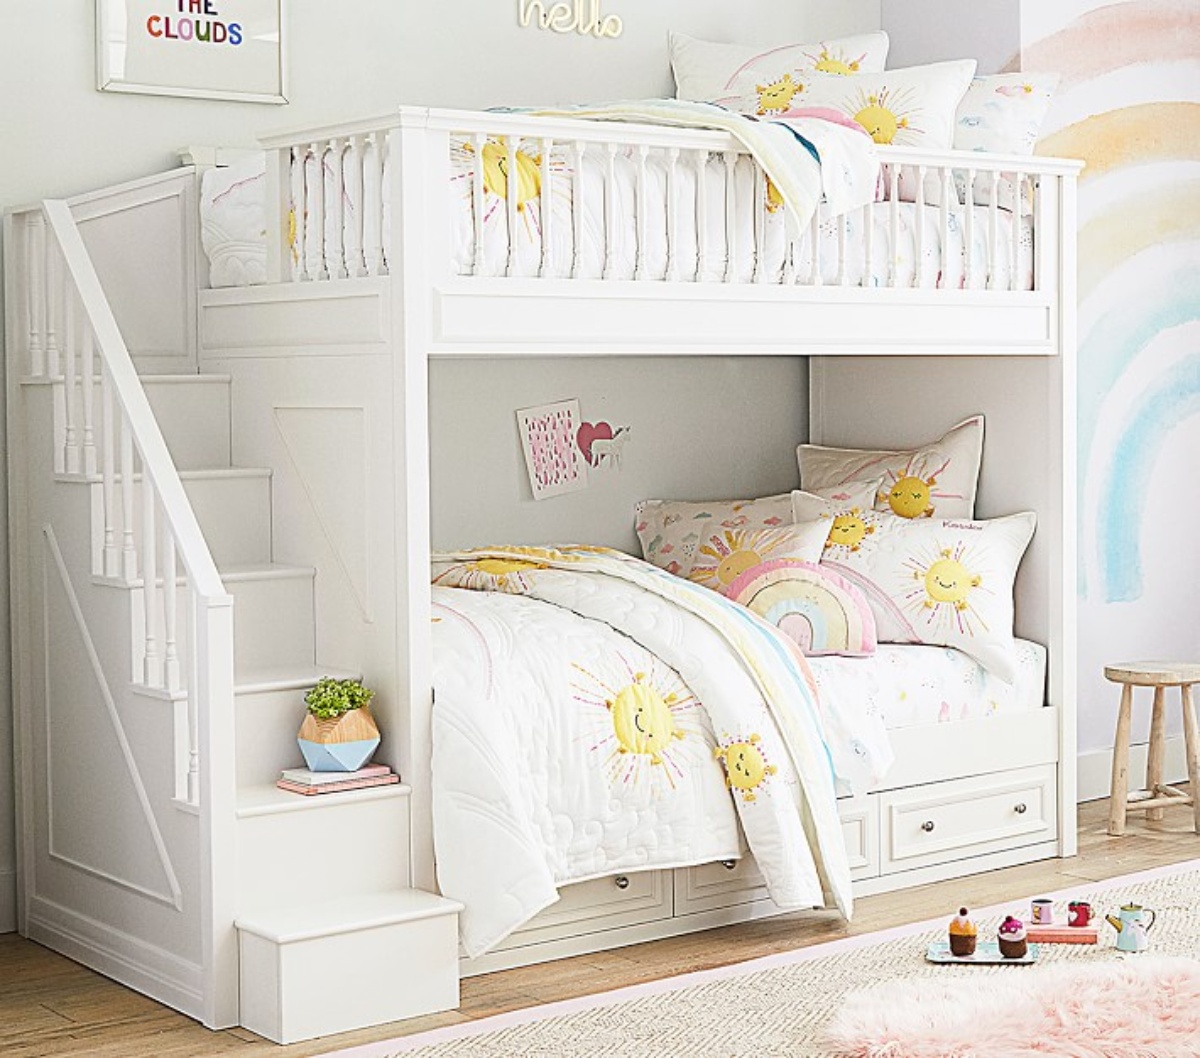 double bunk bed with storage underneath